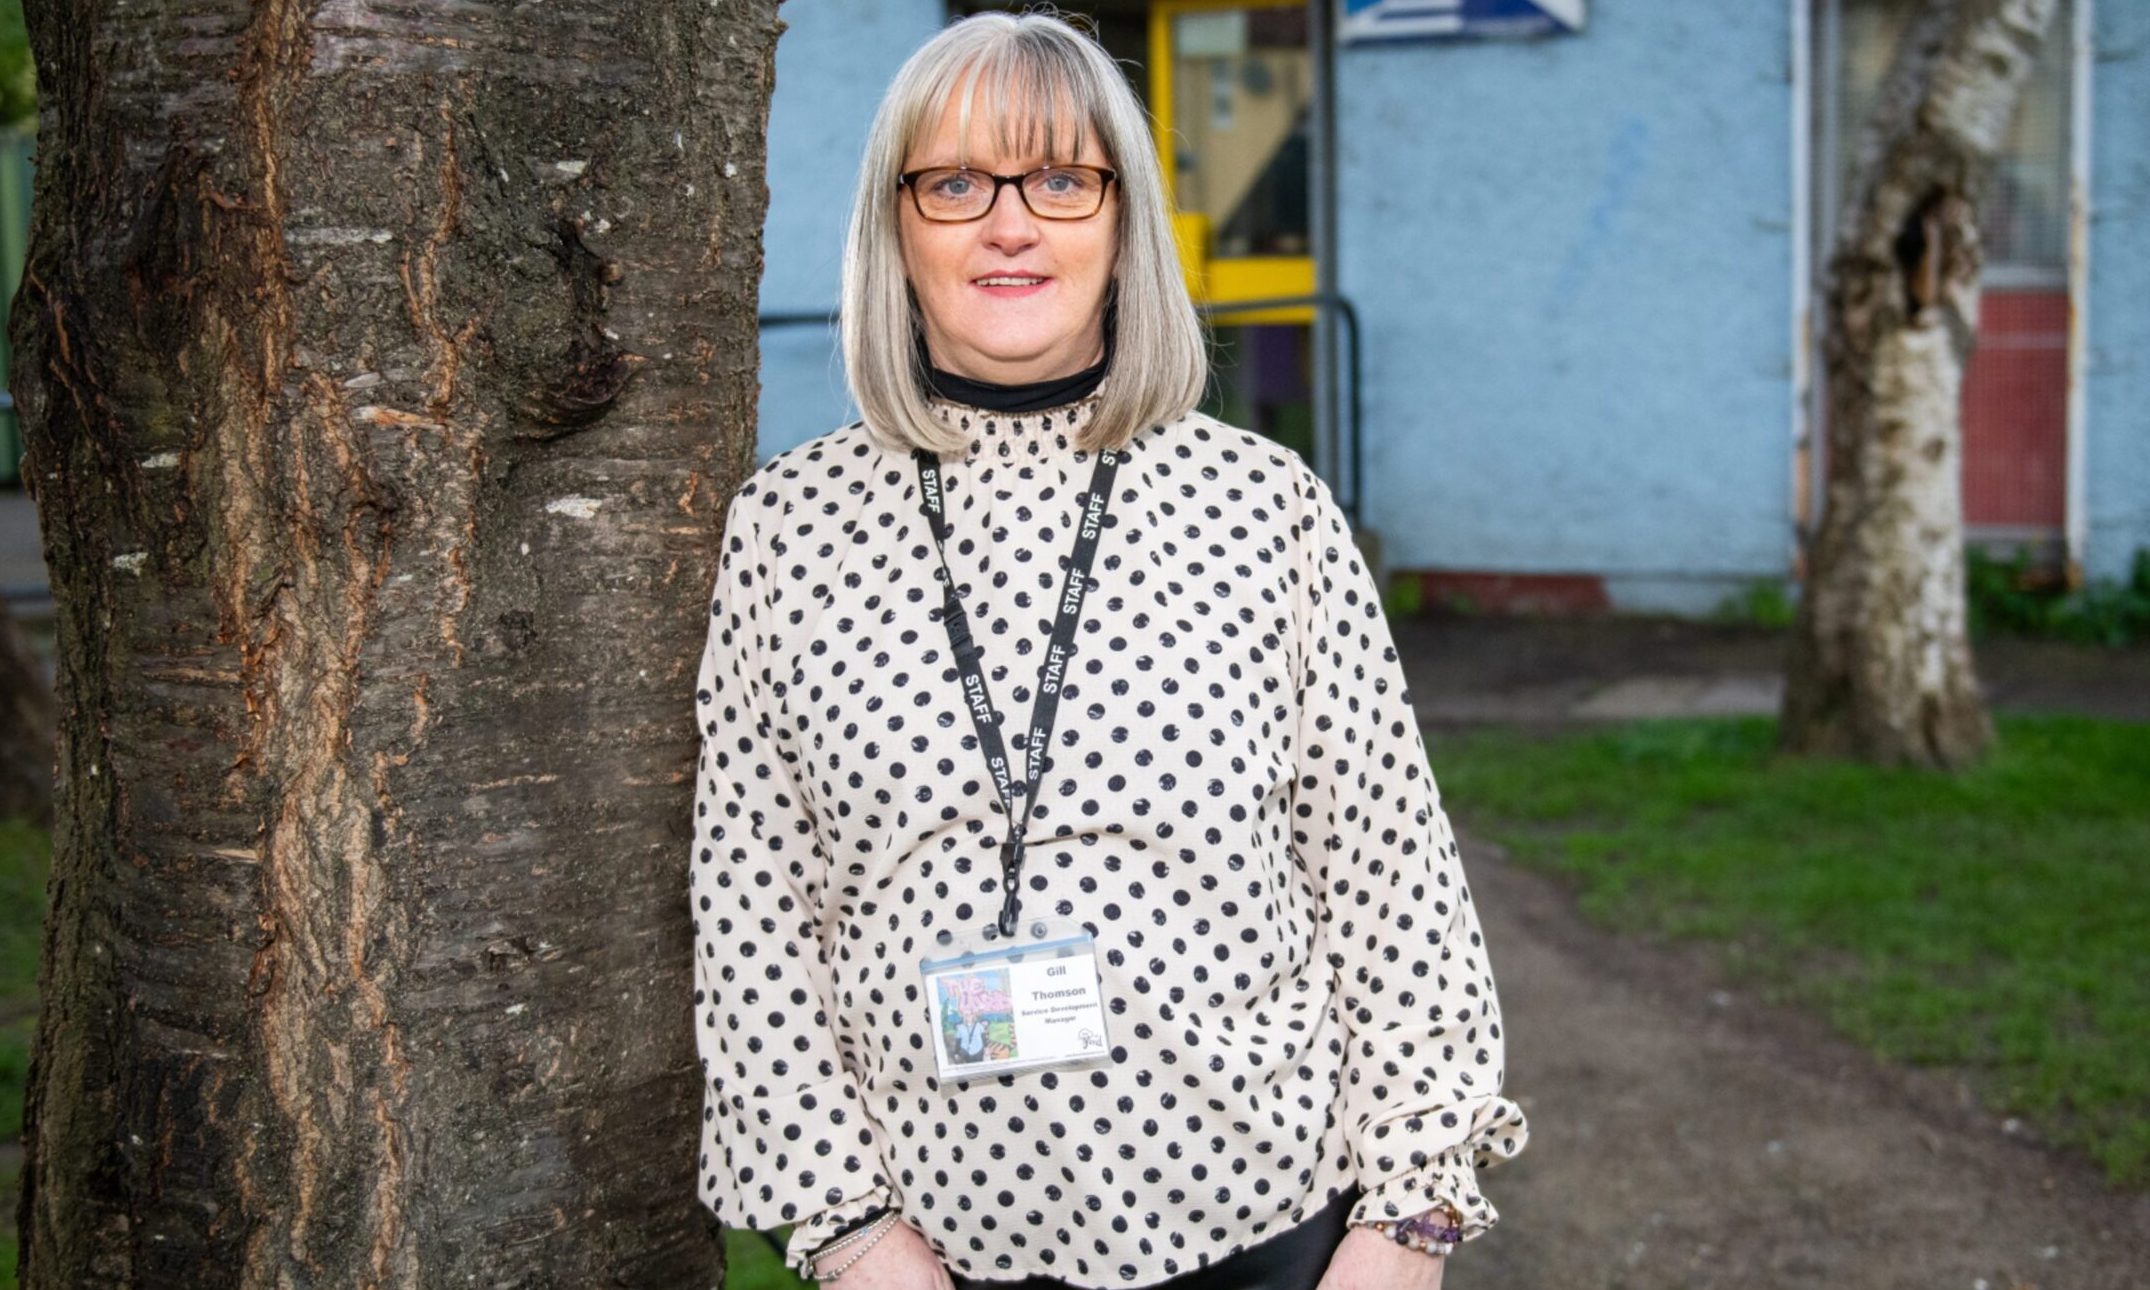 Image shows Gill Thomson of The Yard charity. Gill is standing, leaning against a tree. She is wearing a black and white spotted top with dark bottoms and a lanyard around her neck. Gill is smiling and has fair hair cut in a bod and dark-framed glasses.